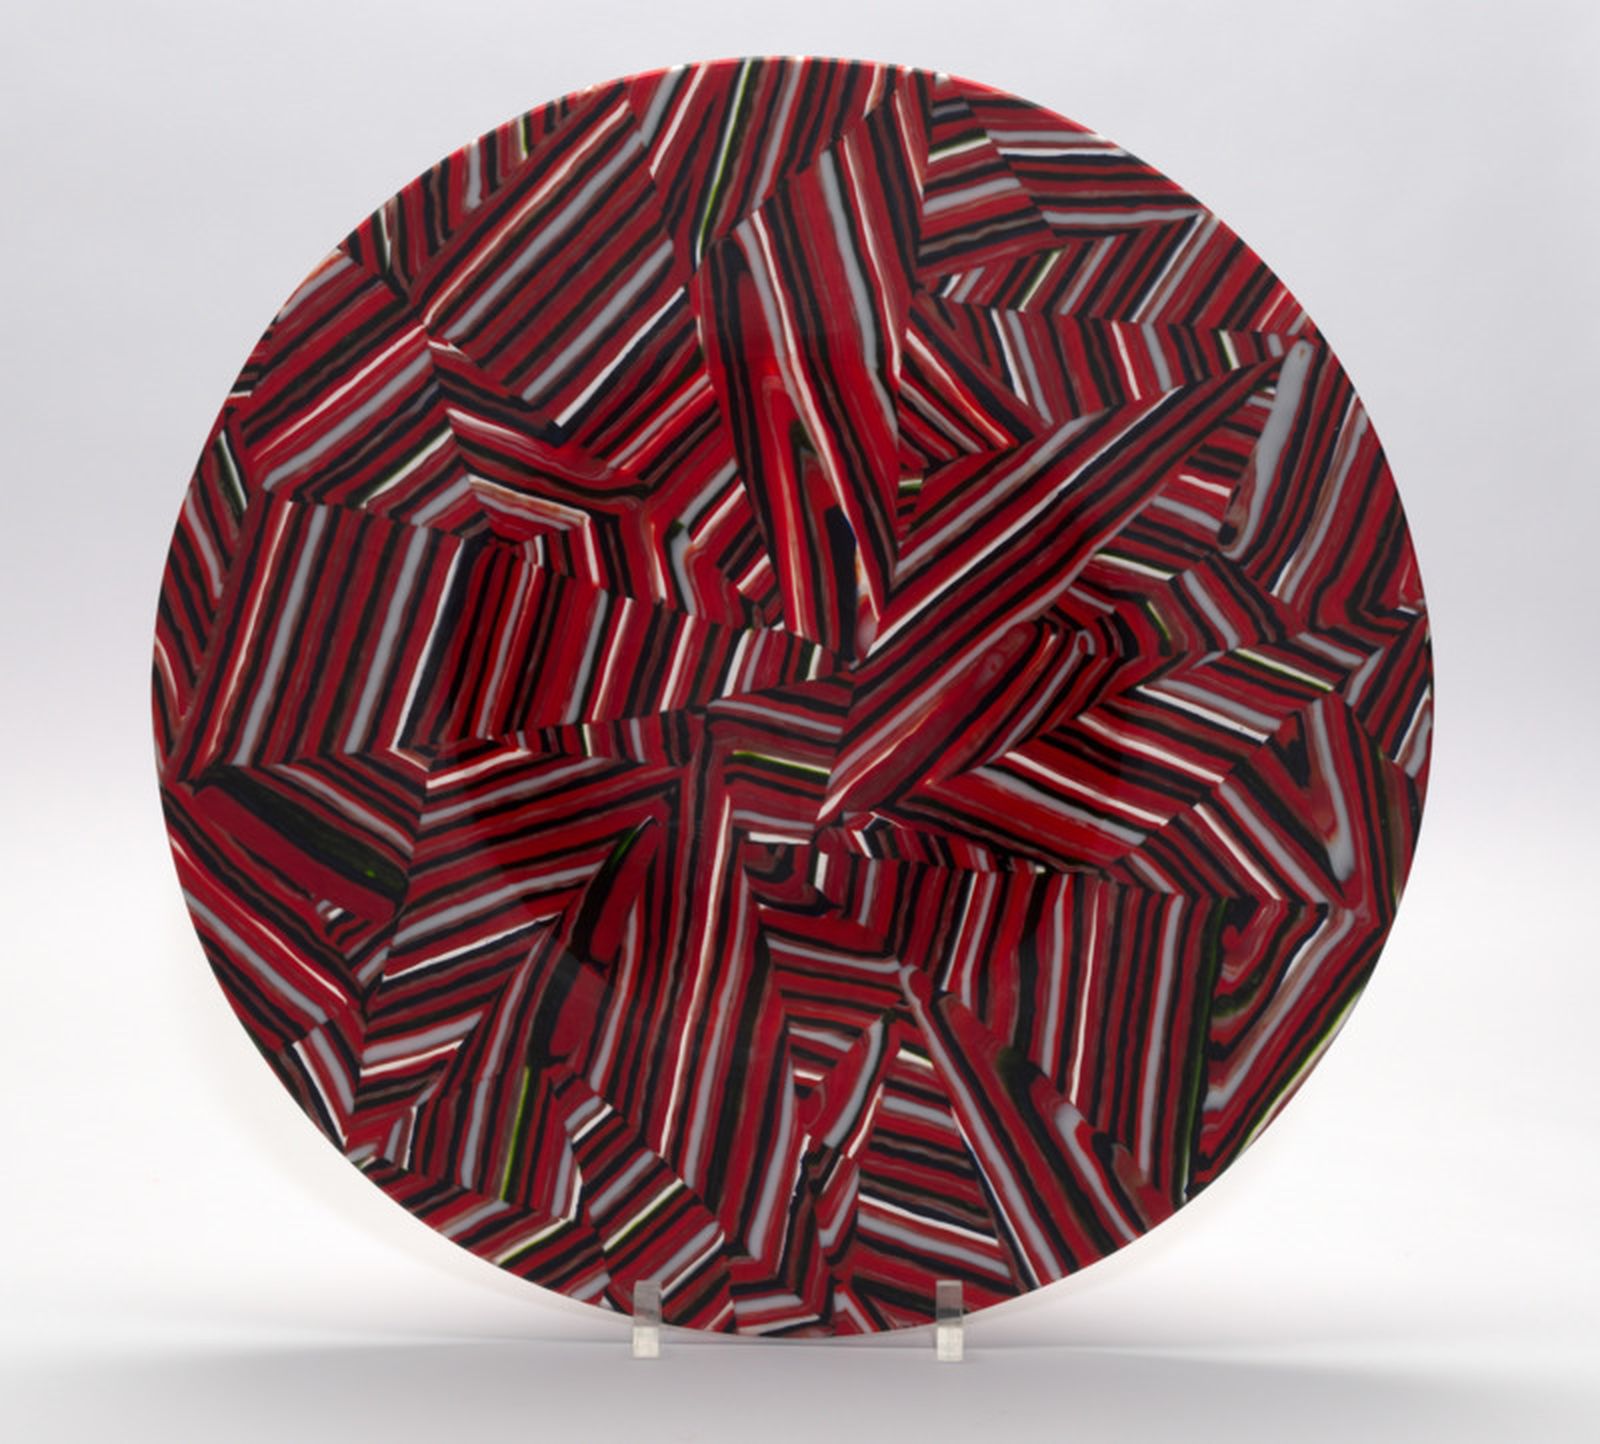 Photograph of red and black glass circular artwork